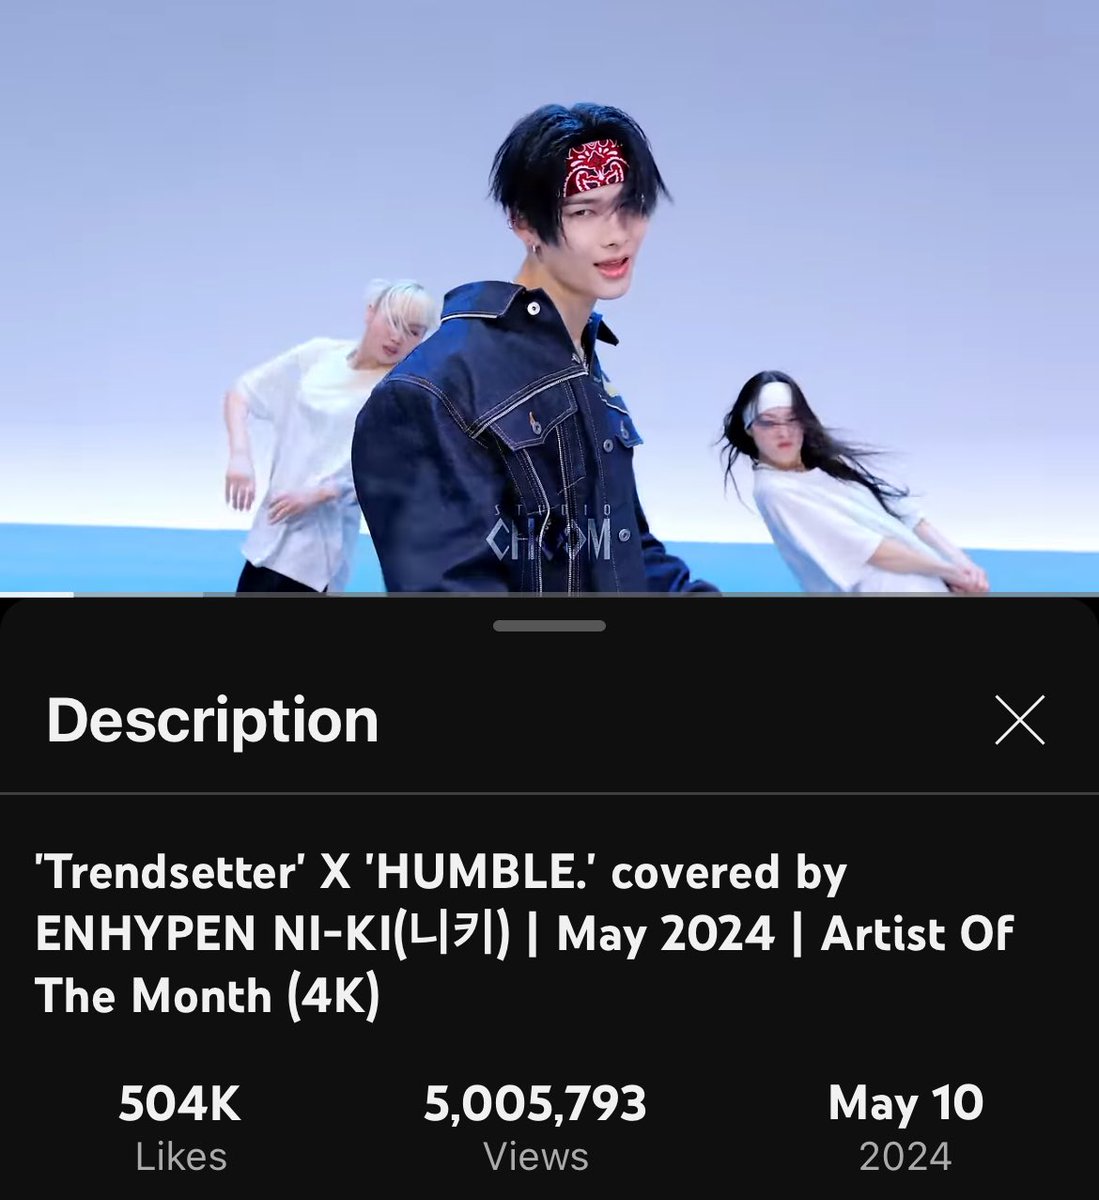 5 Million views for Ni-ki AOTM!  He’s the 4th fastest idol to reach this milestone, and he did it post youtube filtering algorithm change. 

6M next 🎯 Let’s get it!